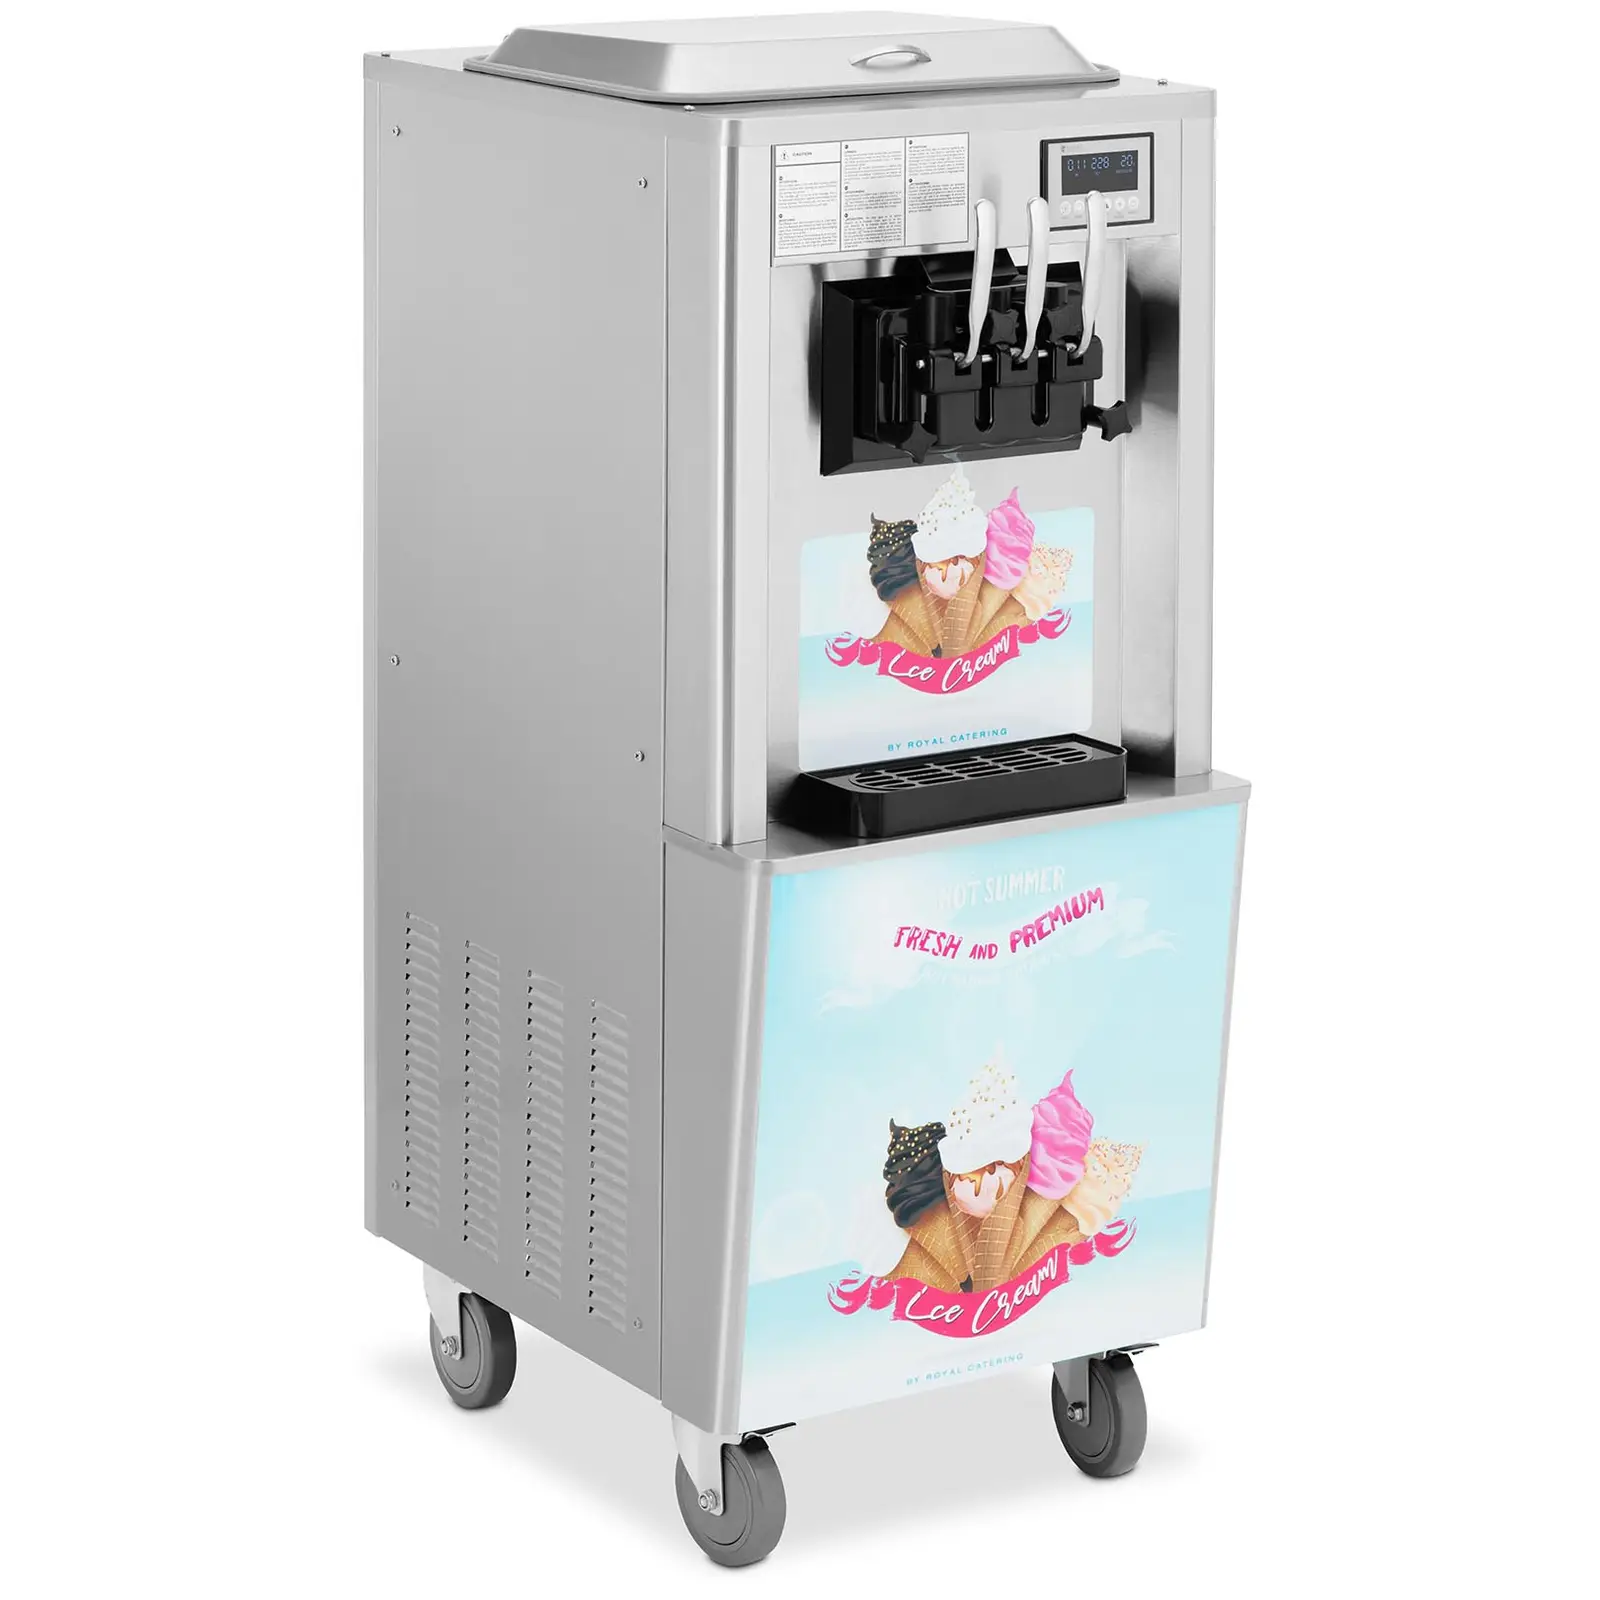 Soft Serve Ice Cream Machine - 2140 W - 33 l/h - 3 flavours - Royal Catering